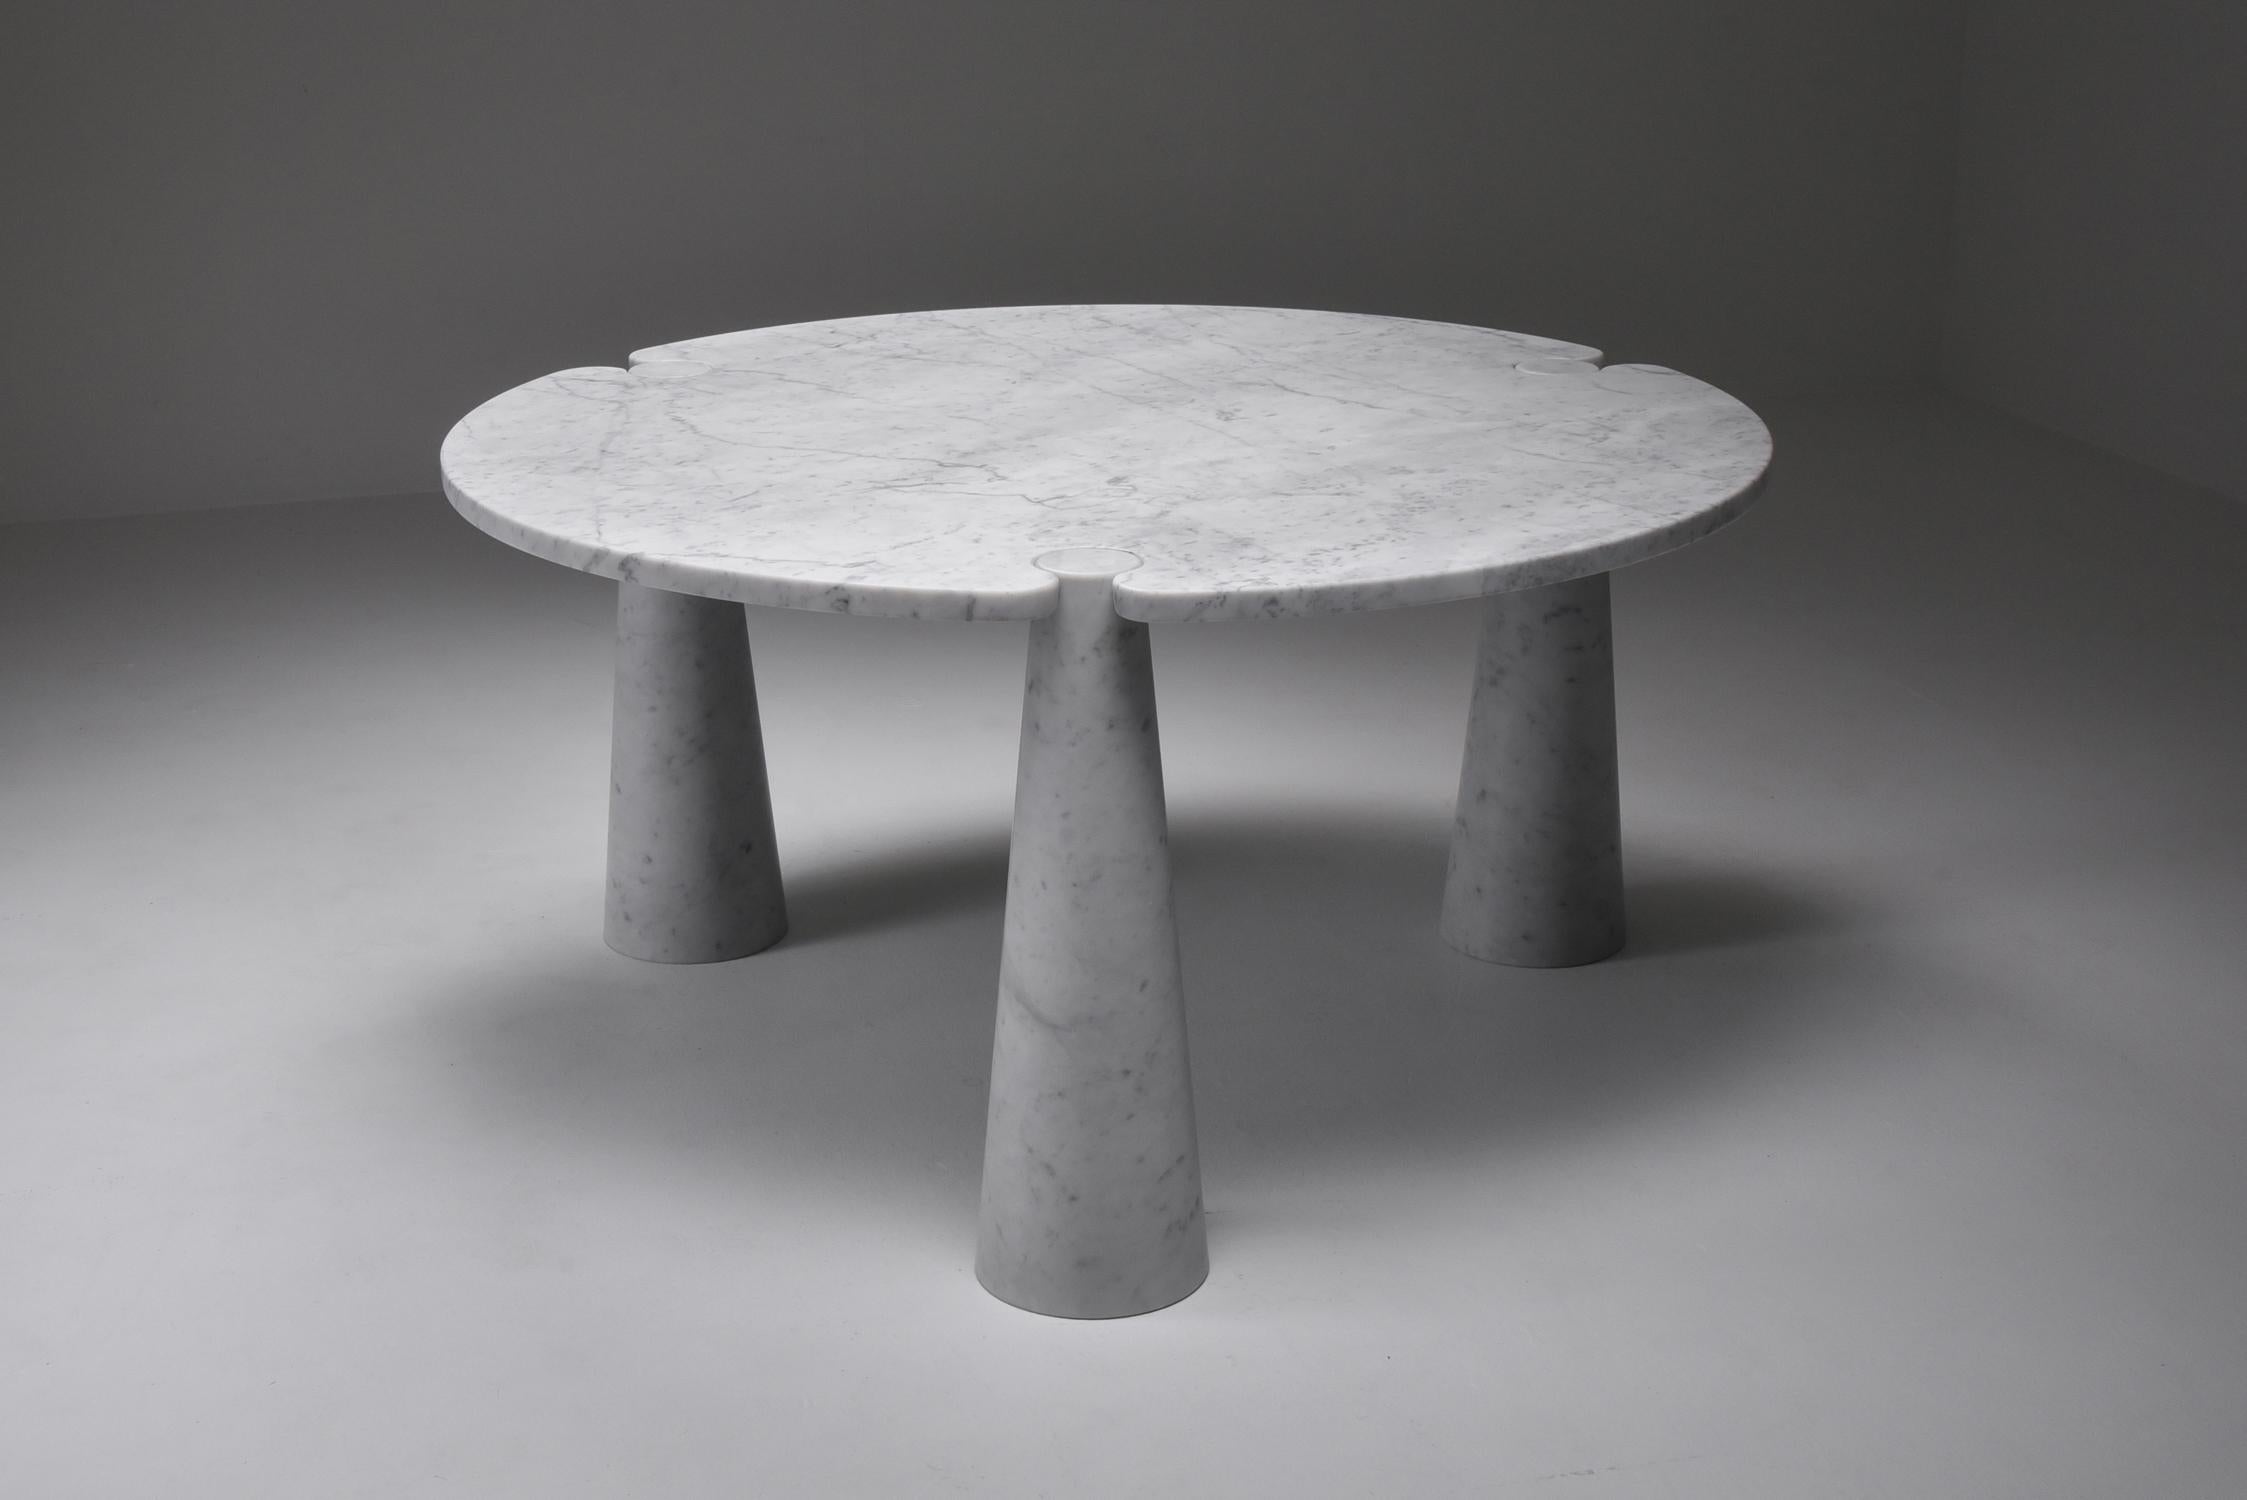 Angelo Mangiarotti, dining table ‘Eros’, round, white marble, 1970s 

This sculptural table by Angelo Mangiarotti is a skillful example of postmodern design. The table is executed in white marble. The oval tabletop features no joints or clamps and